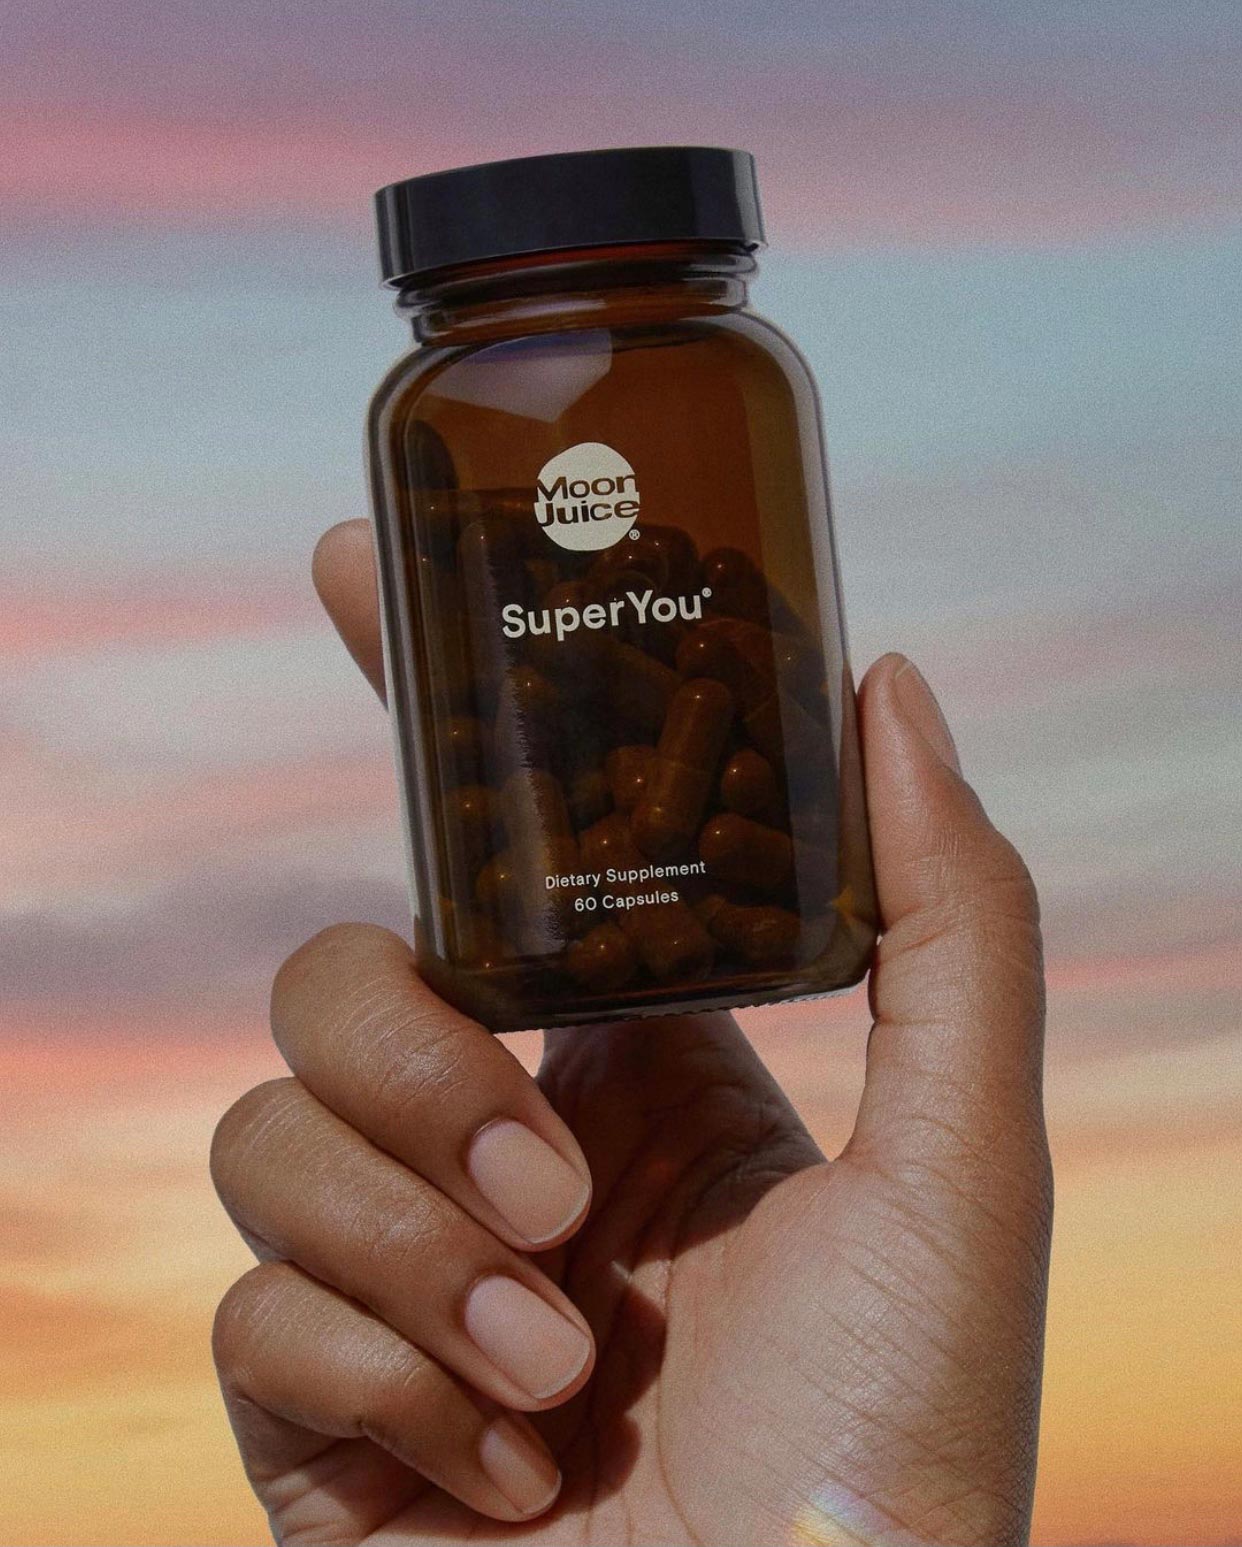 Moon Juice SuperYou Dietary Supplements being held in a sunset